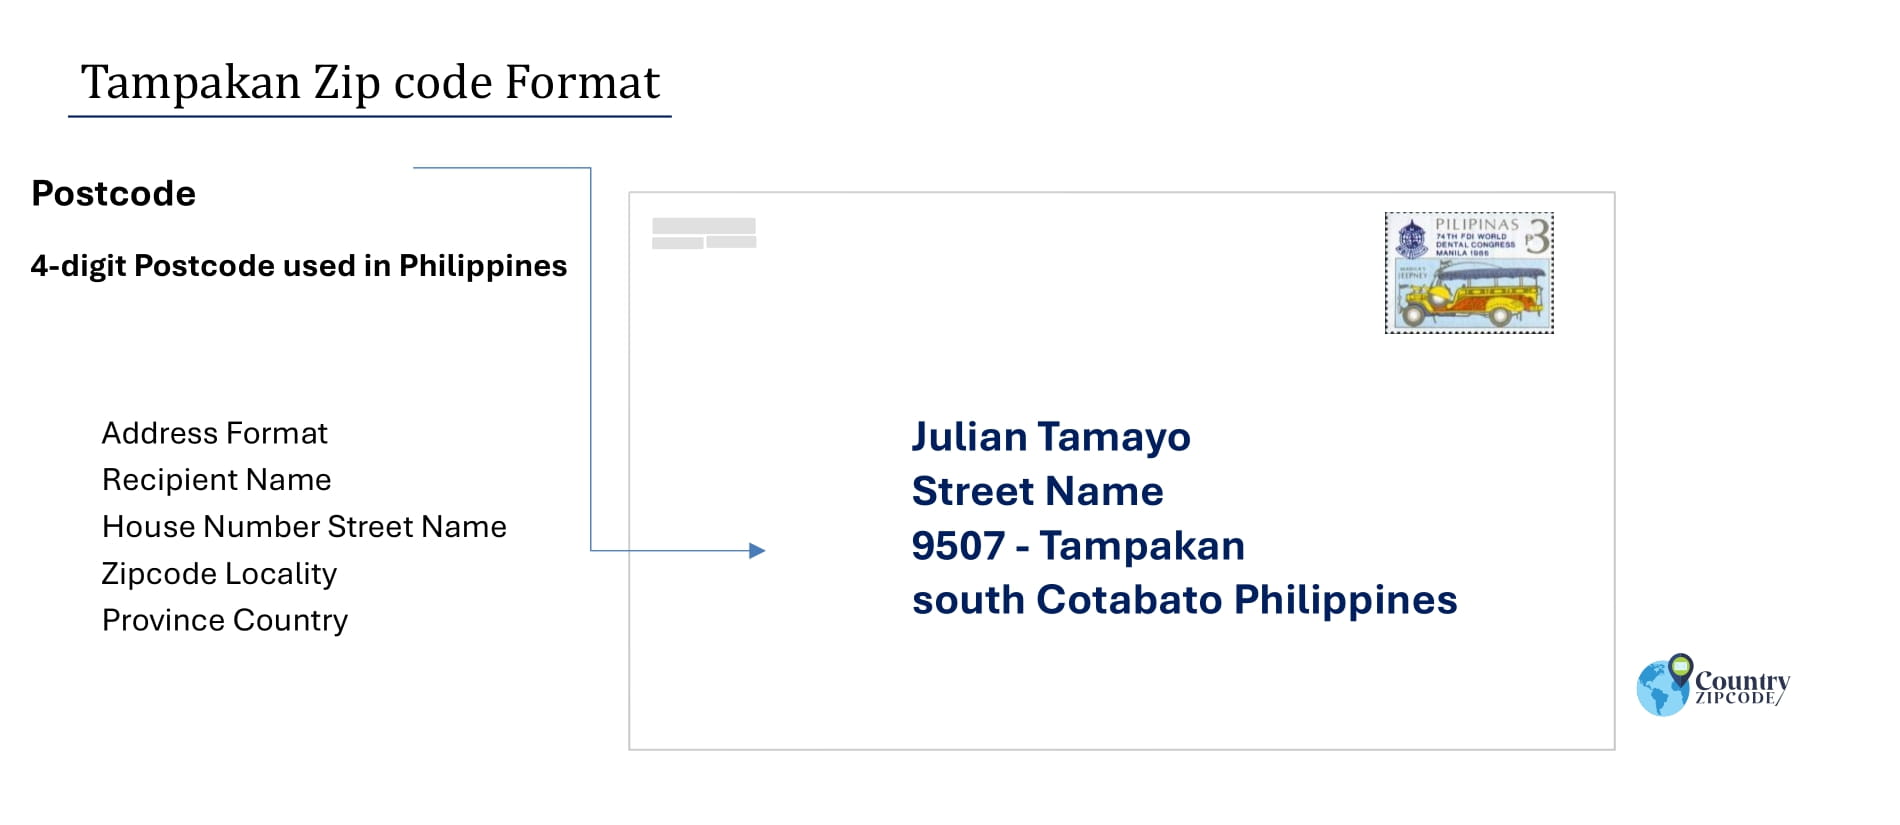 example of Tampakan Philippines zip code and address format